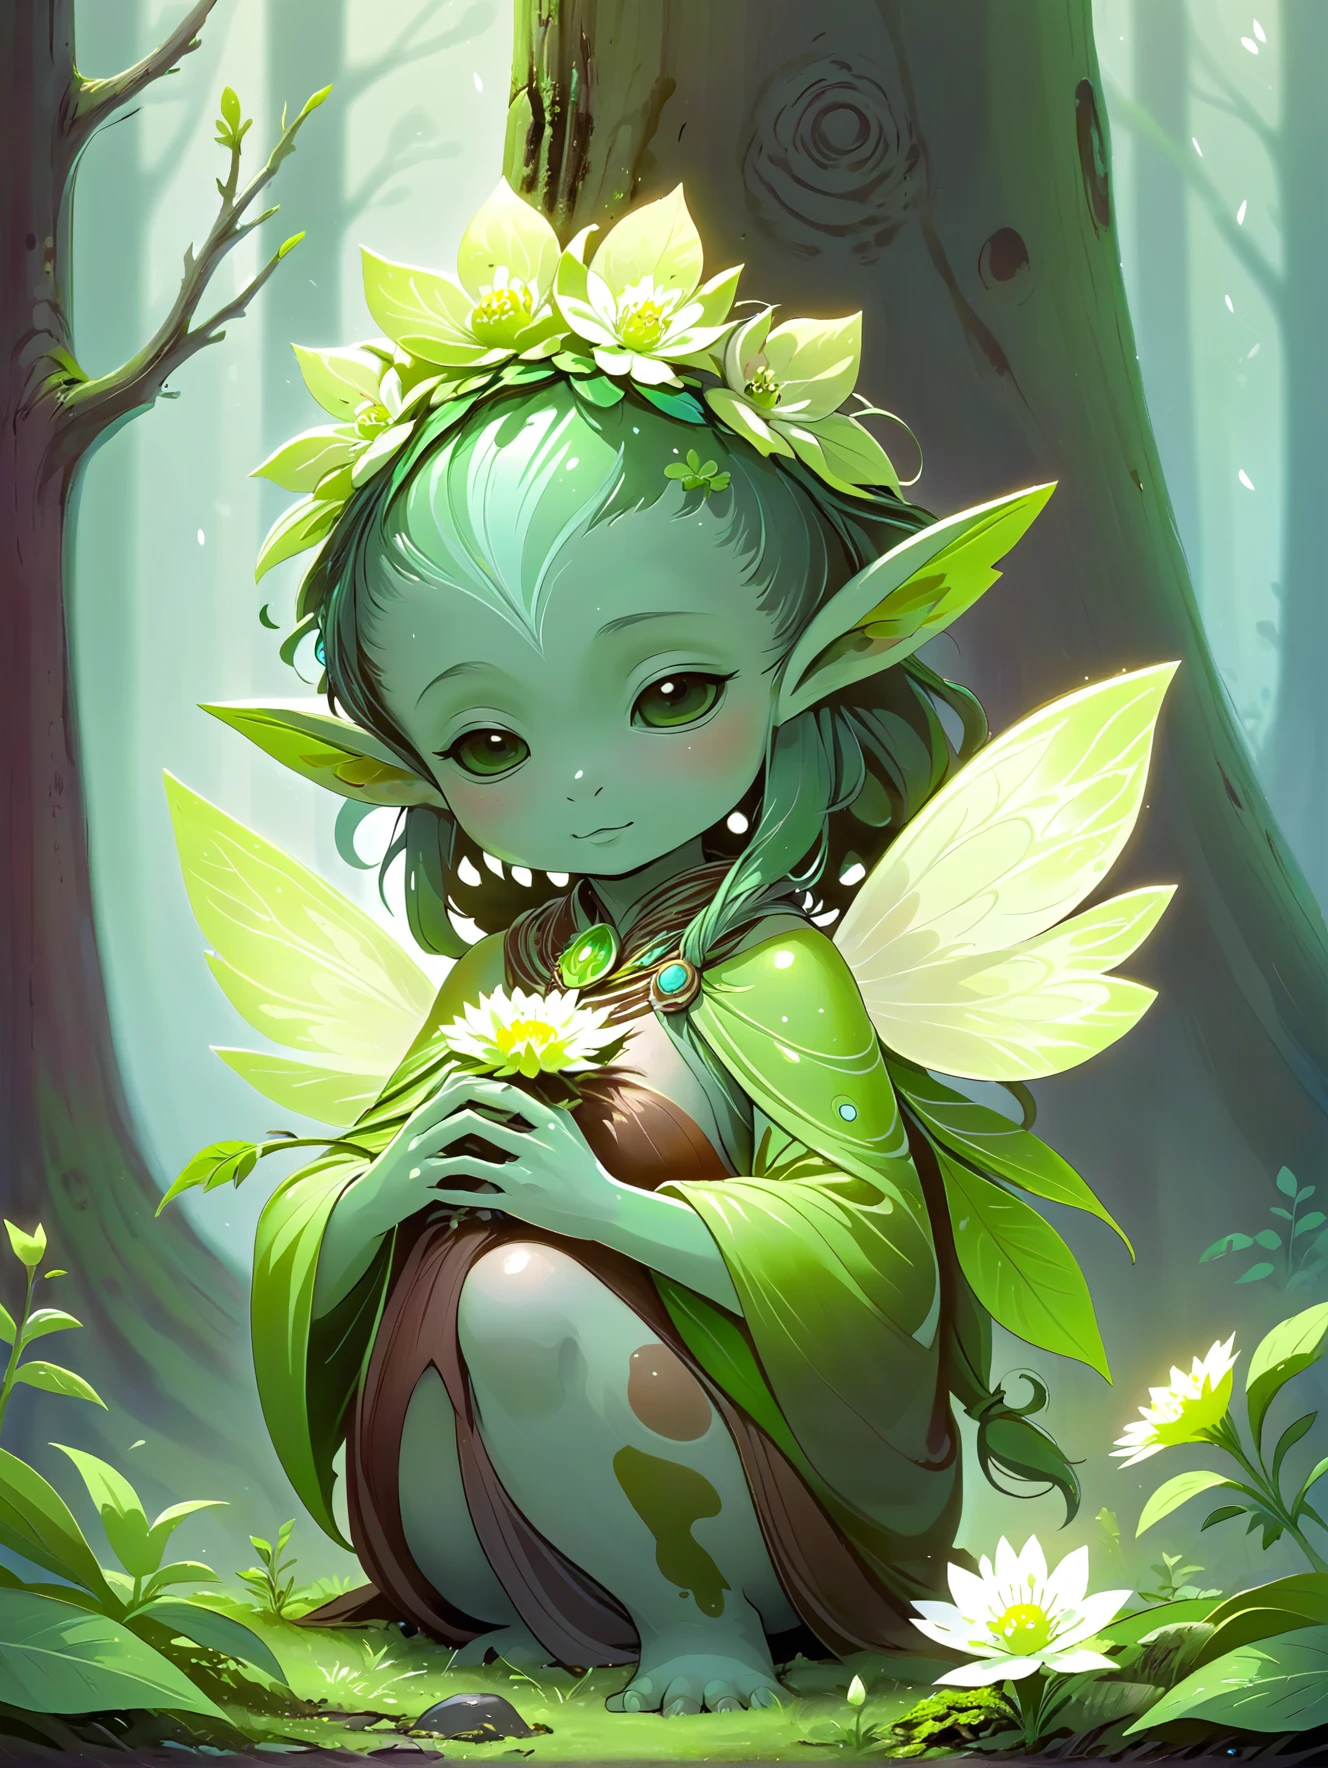 A  earth spirit, with a mossy green hue, tending to a budding flower in a forest clearing.